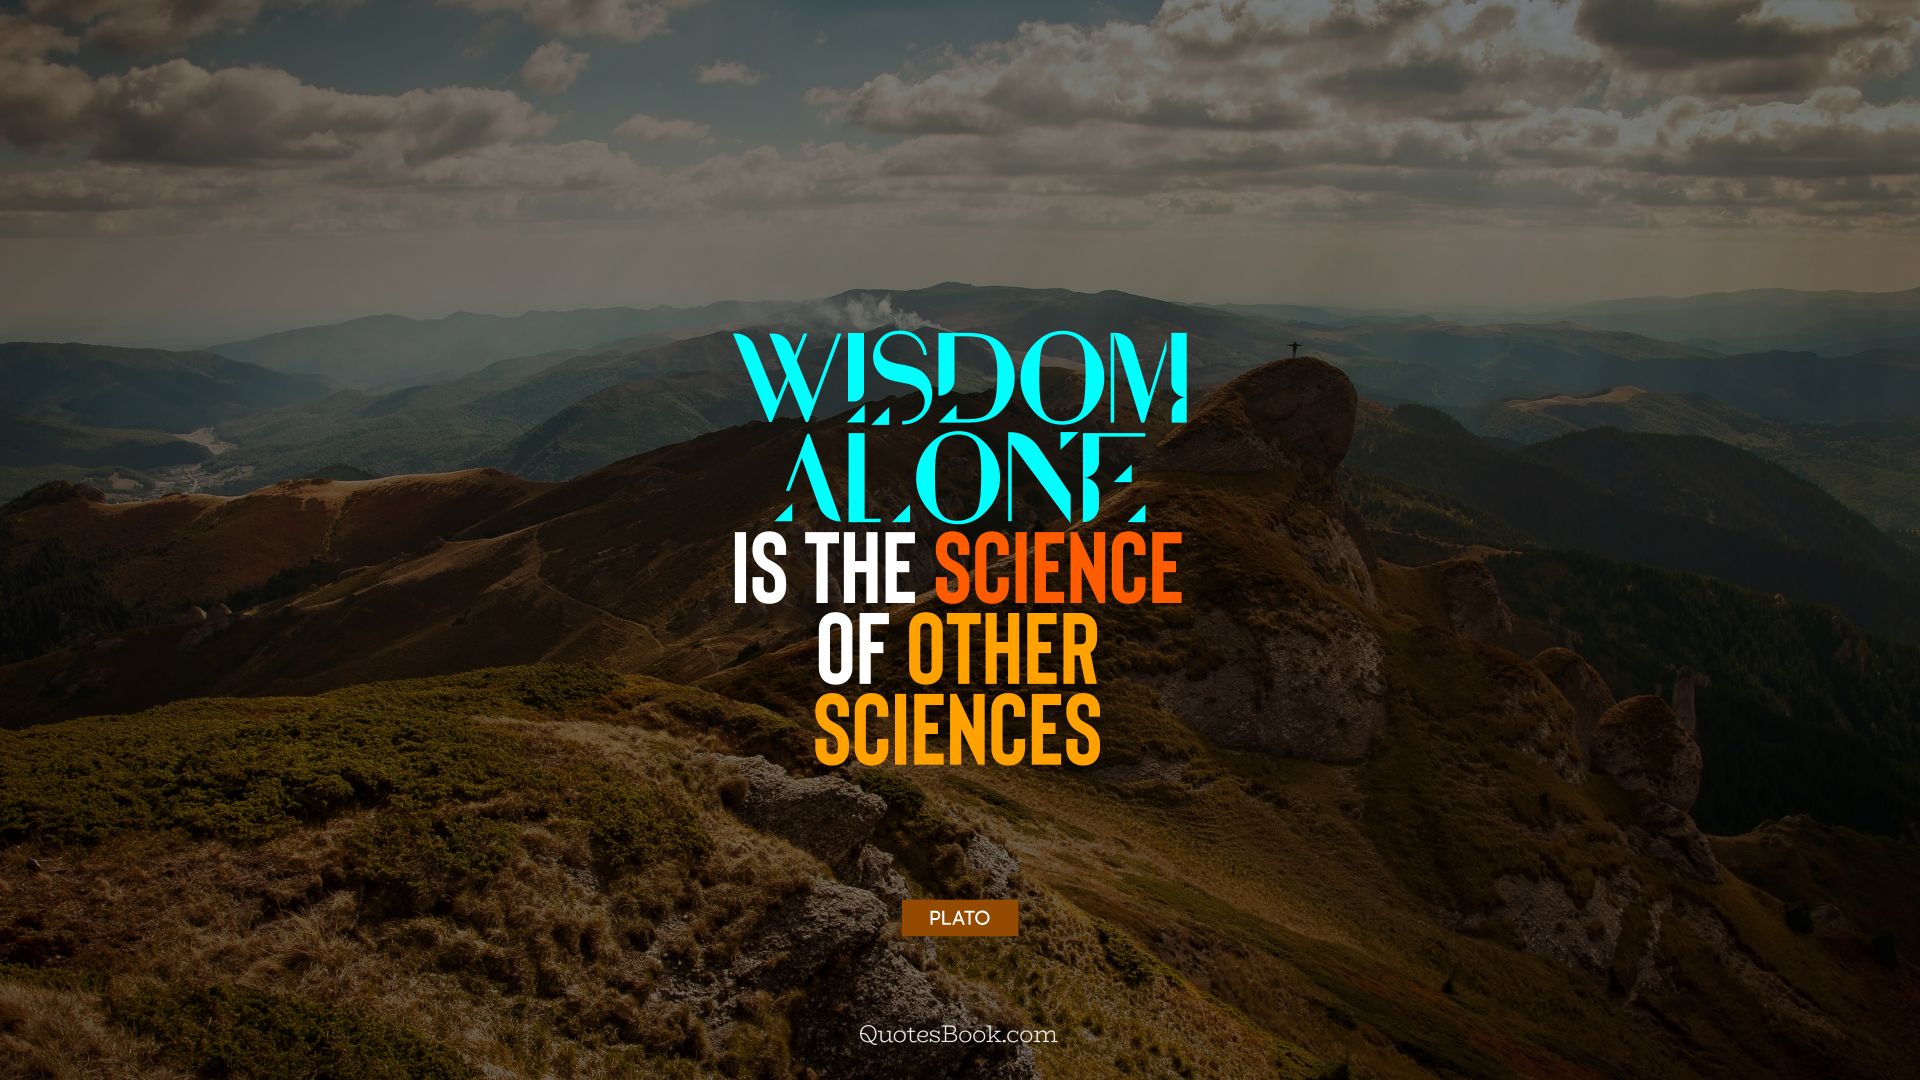 Wisdom alone is the science of other sciences. - Quote by Plato